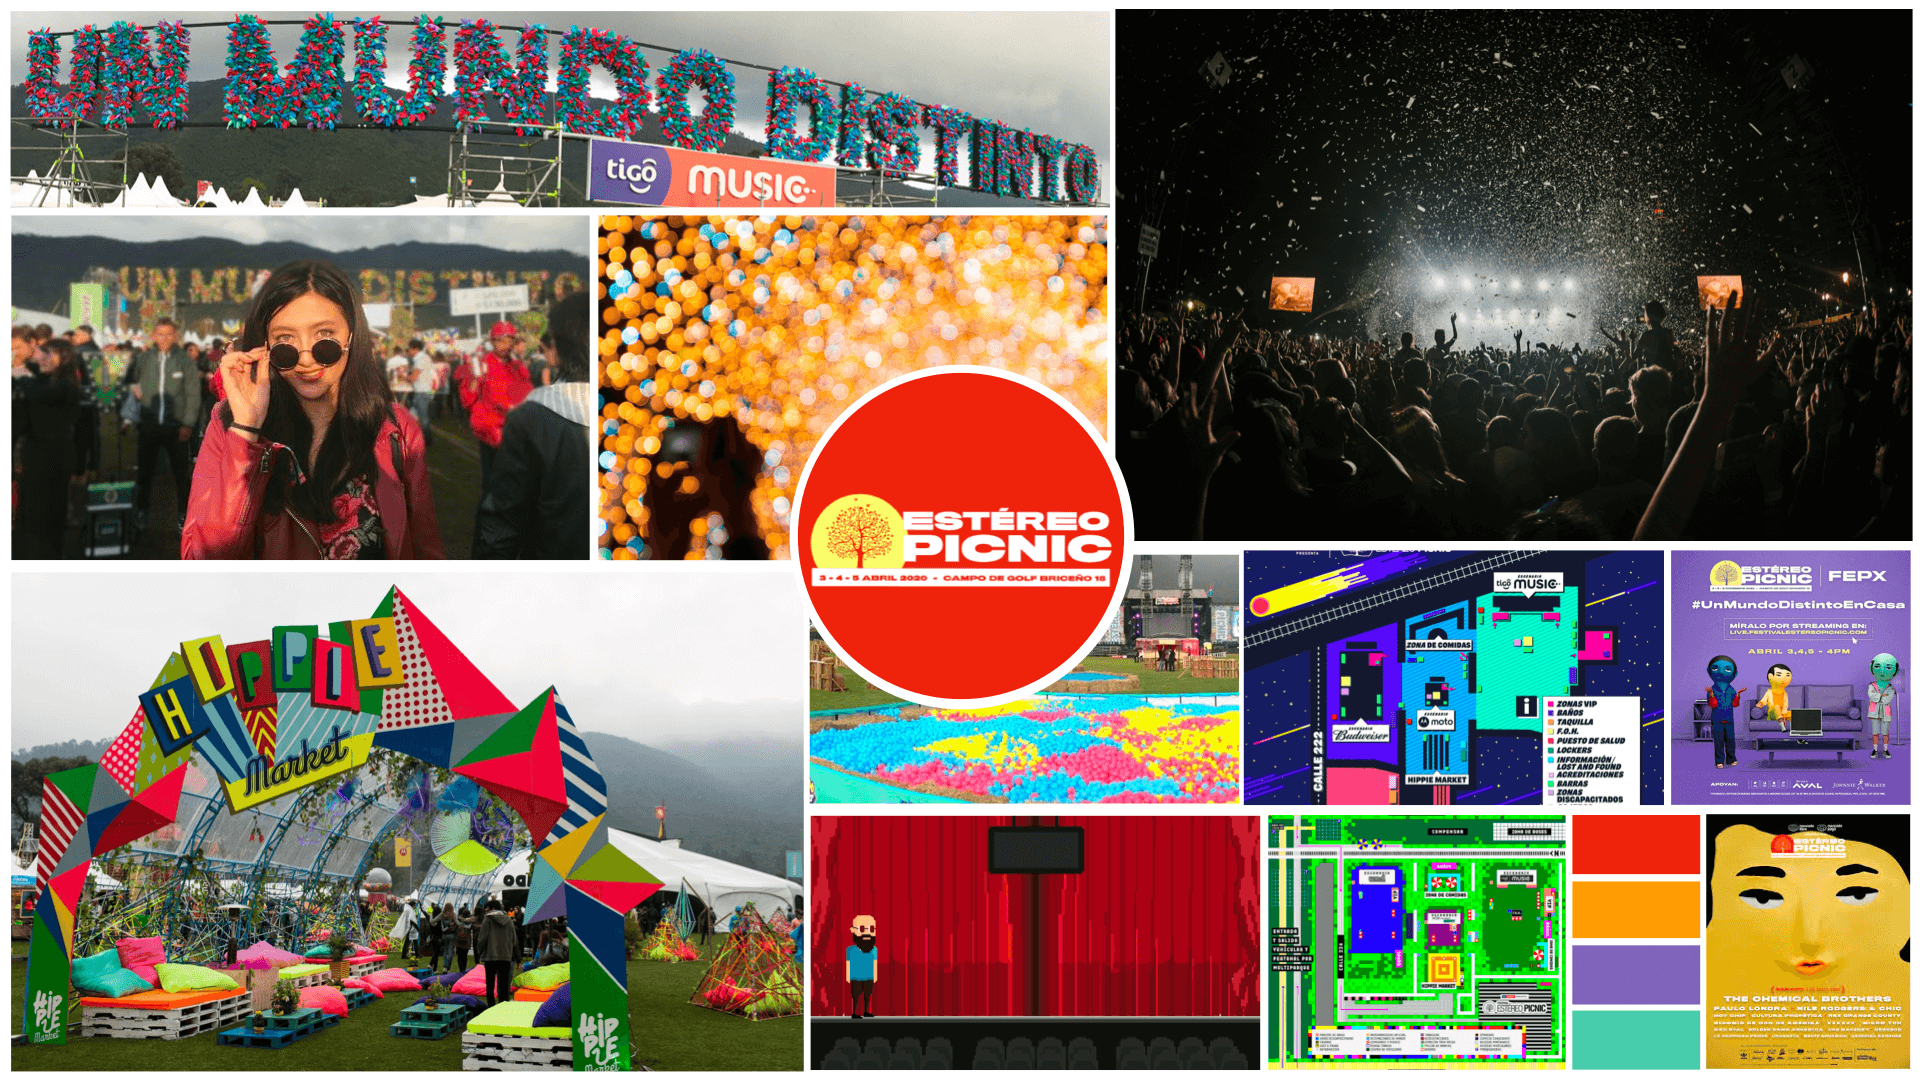 Moodboard of the festival